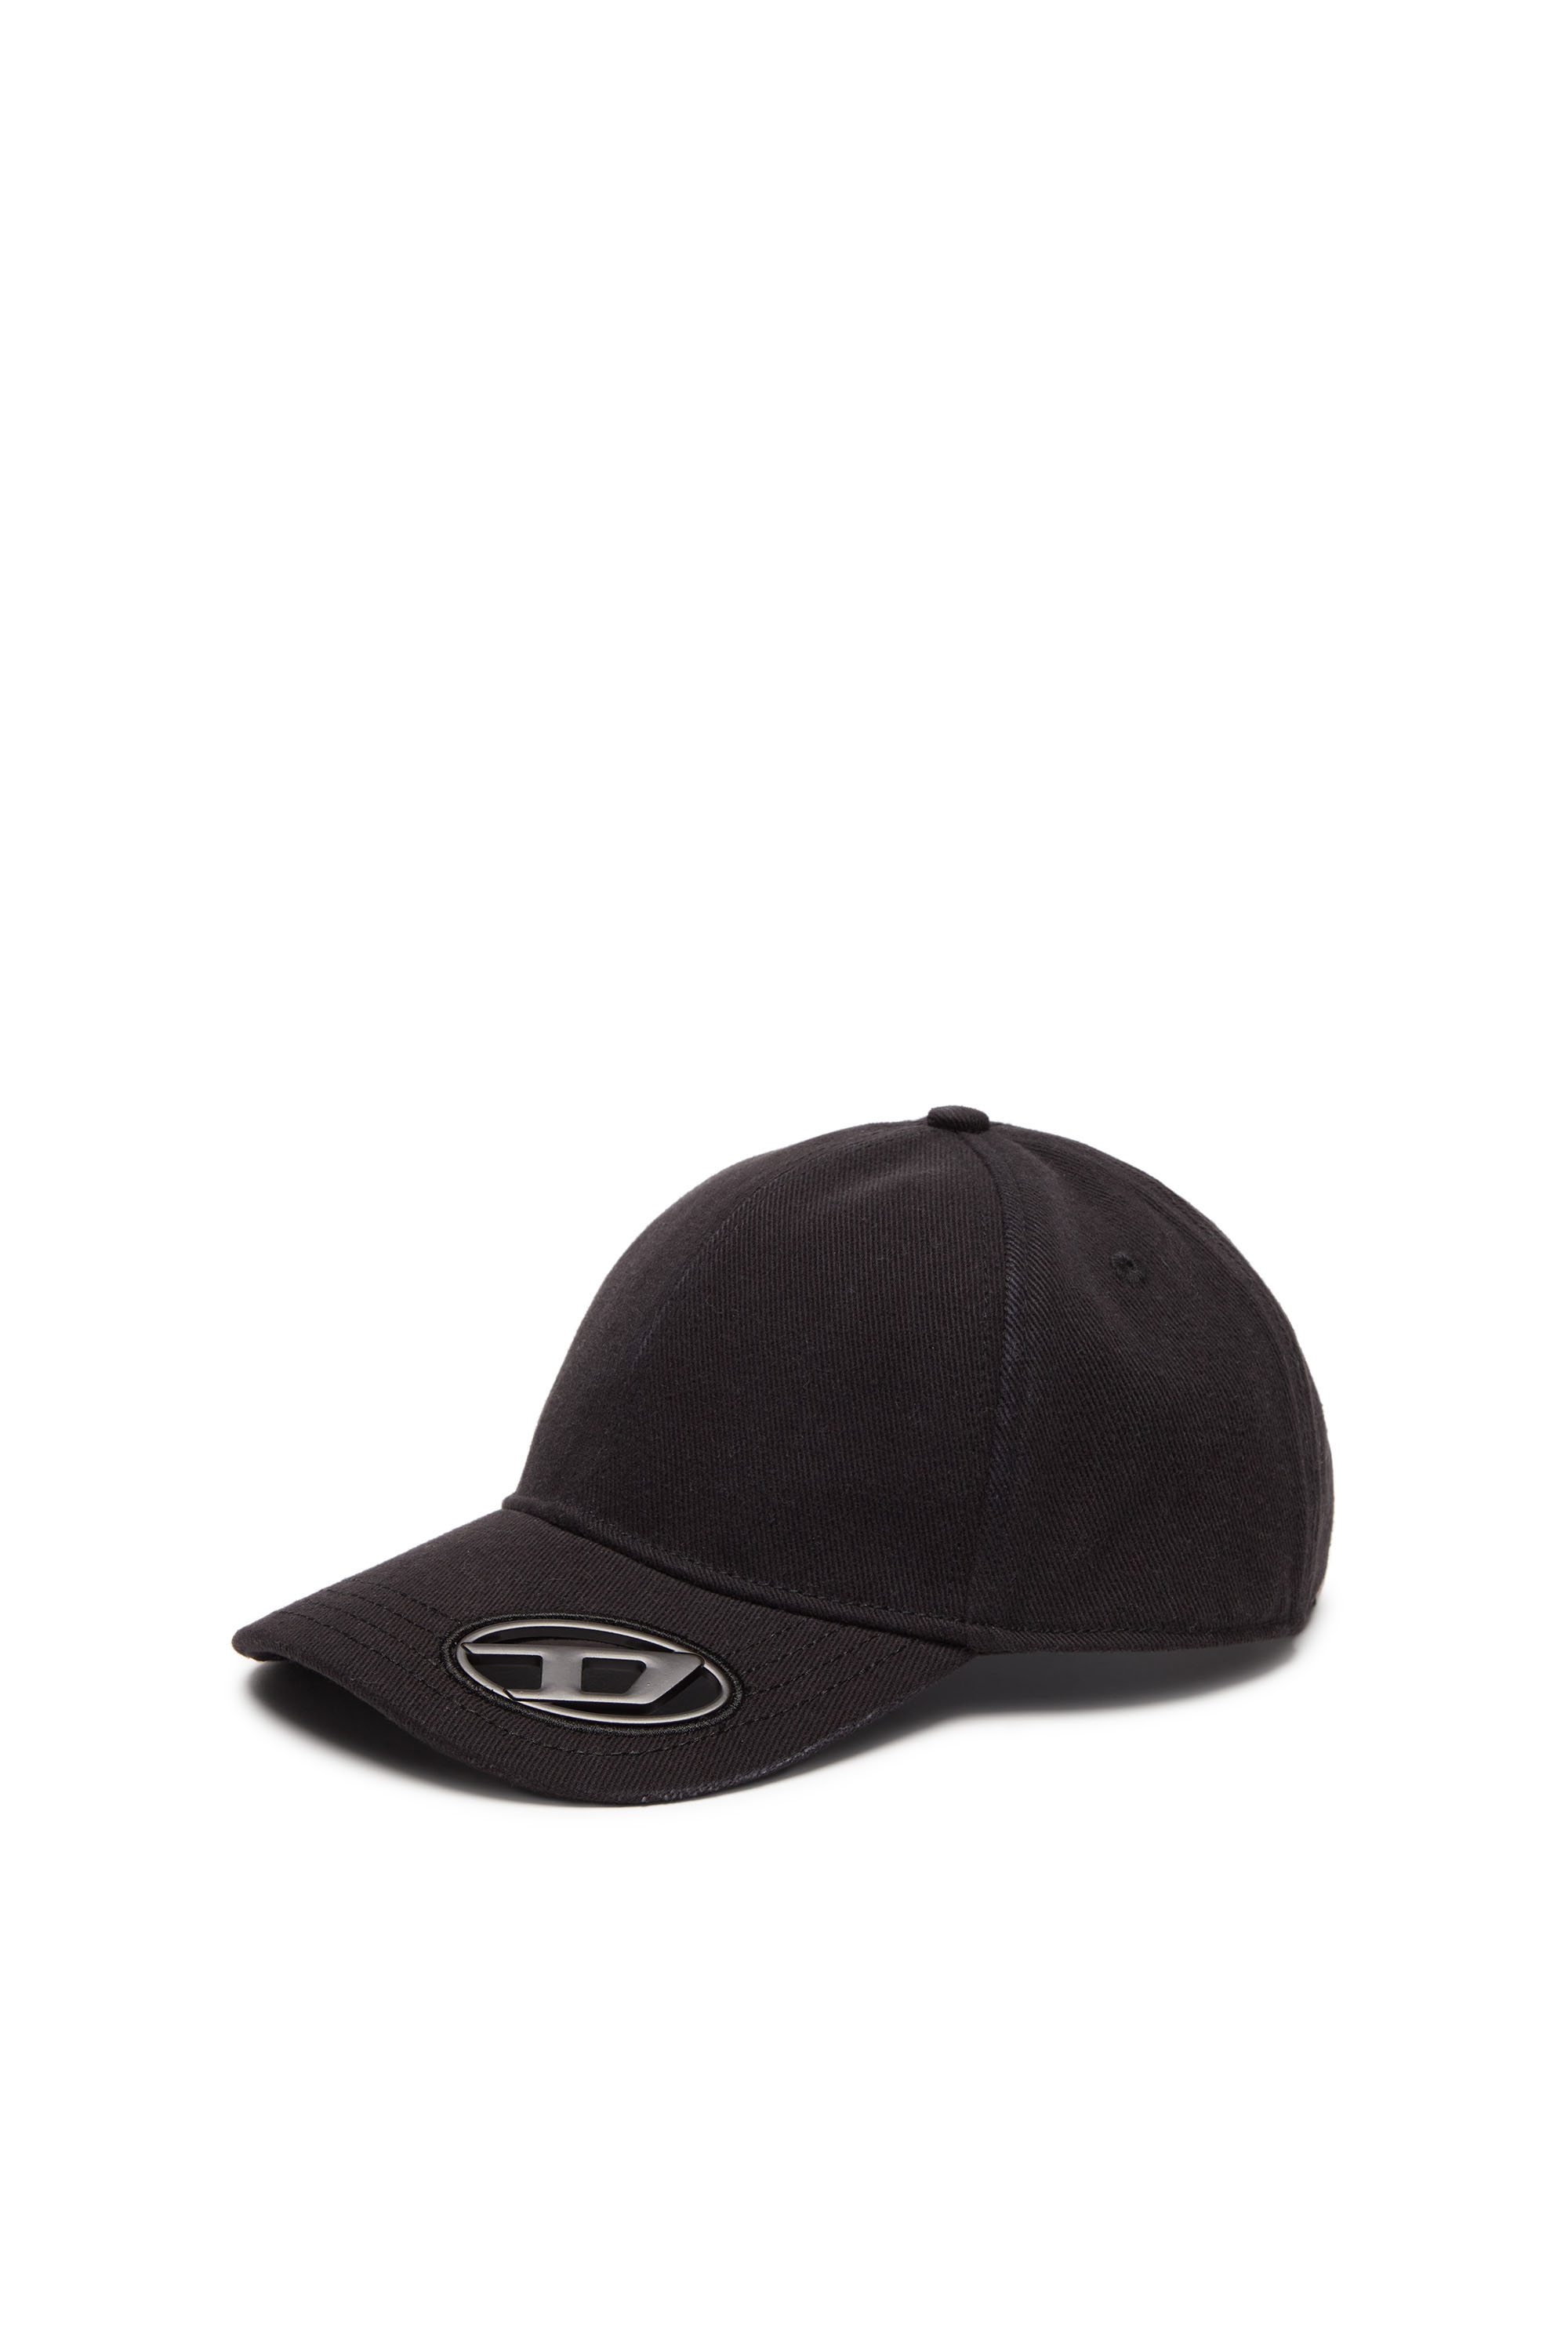 Diesel Baseball Cap With Oval D Plaque In Black